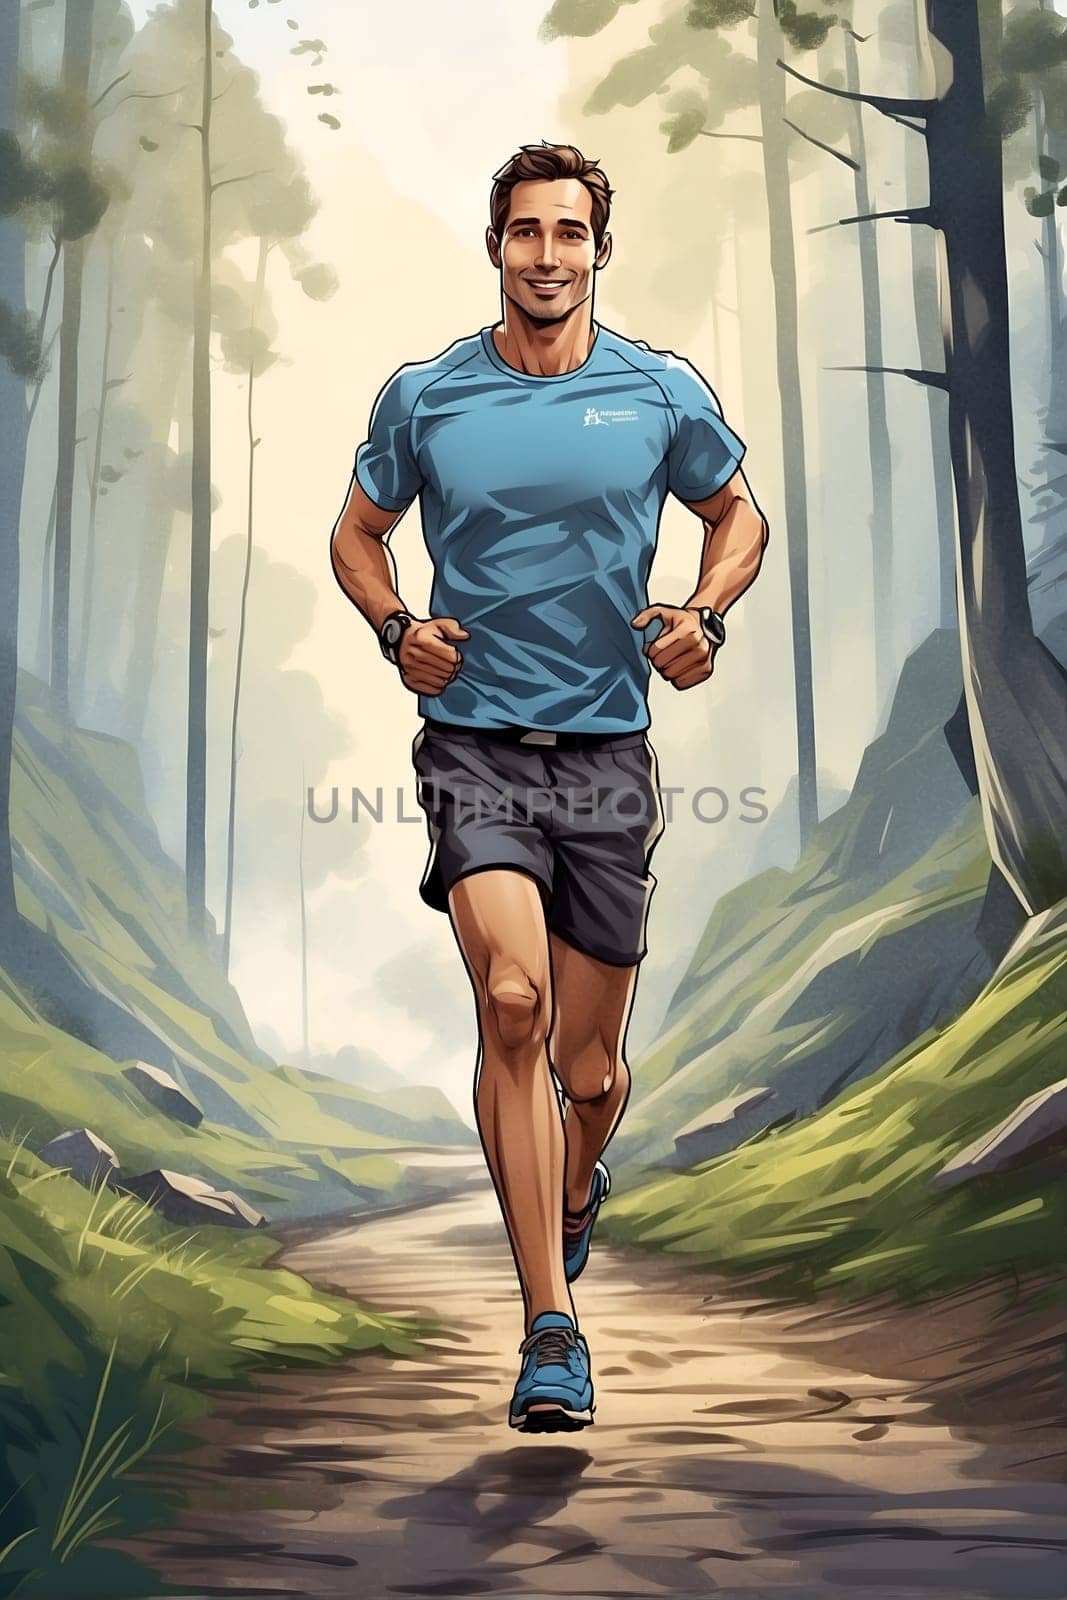 A man with boundless energy sprints through the woods, savoring the tranquility of nature while getting in a vigorous workout.